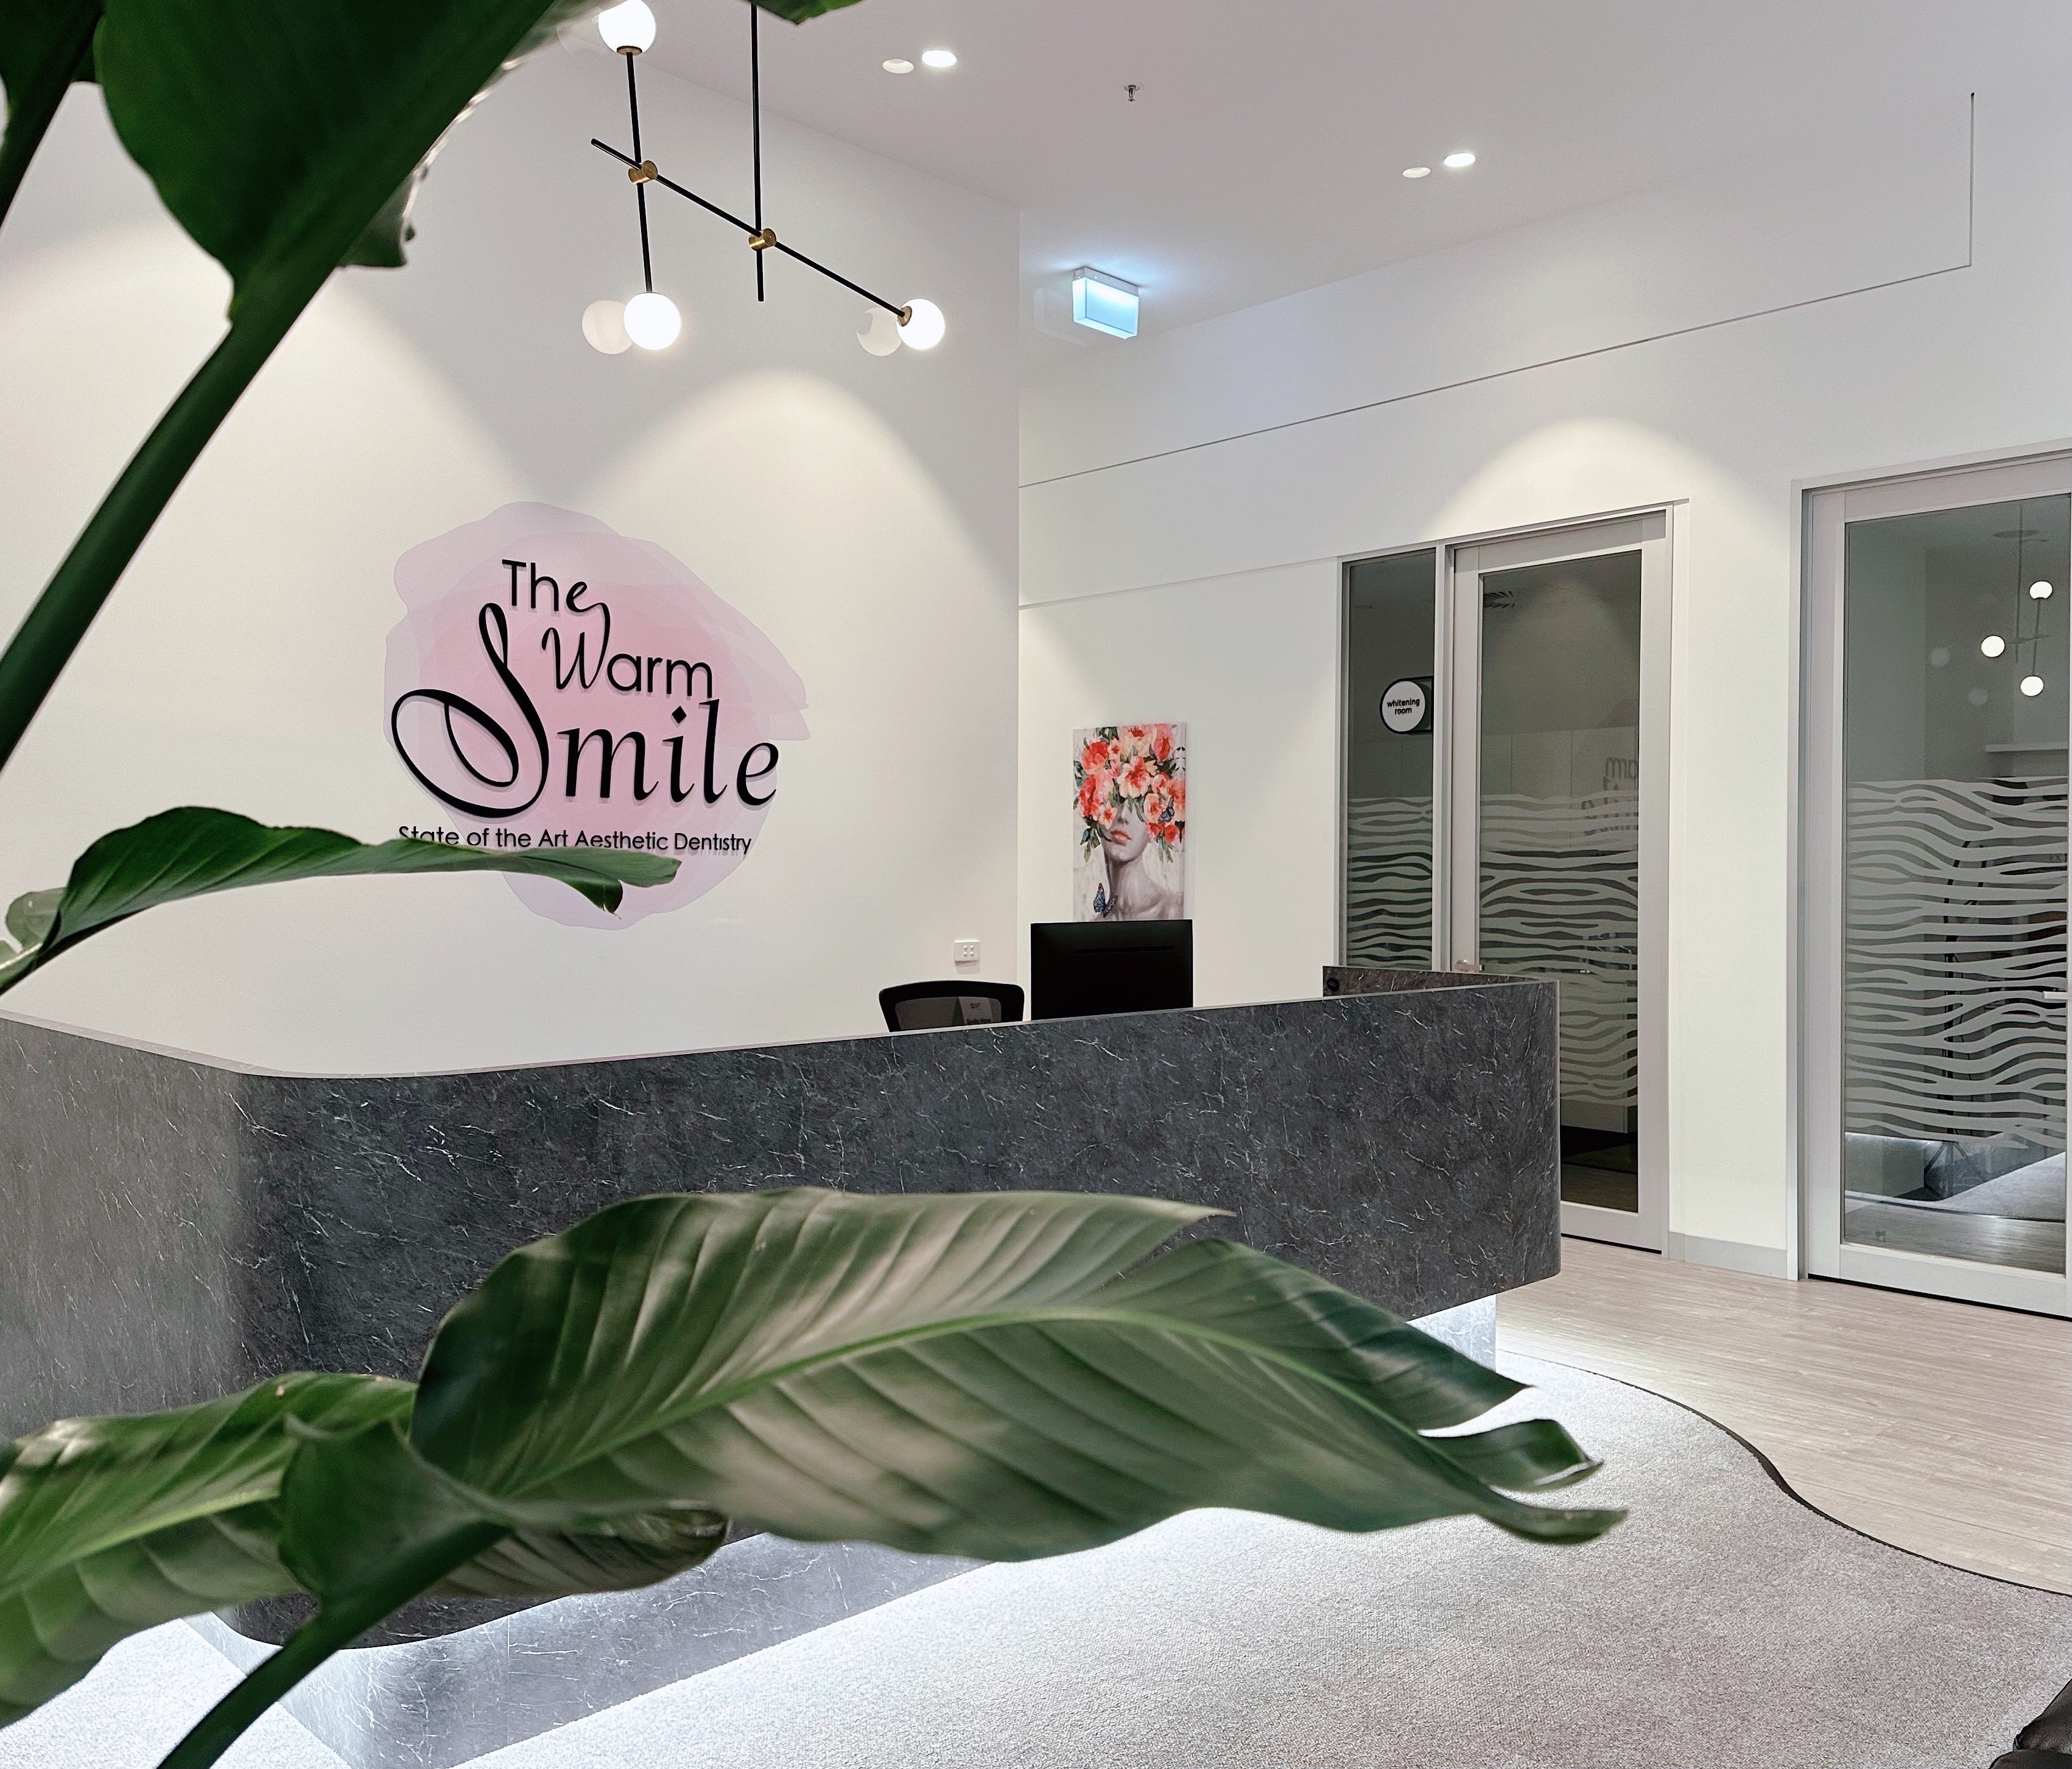 The Warm Smile. Melbourne dentist. Cosmetic dentist in Melbourne. Dental clinic. Dentist.